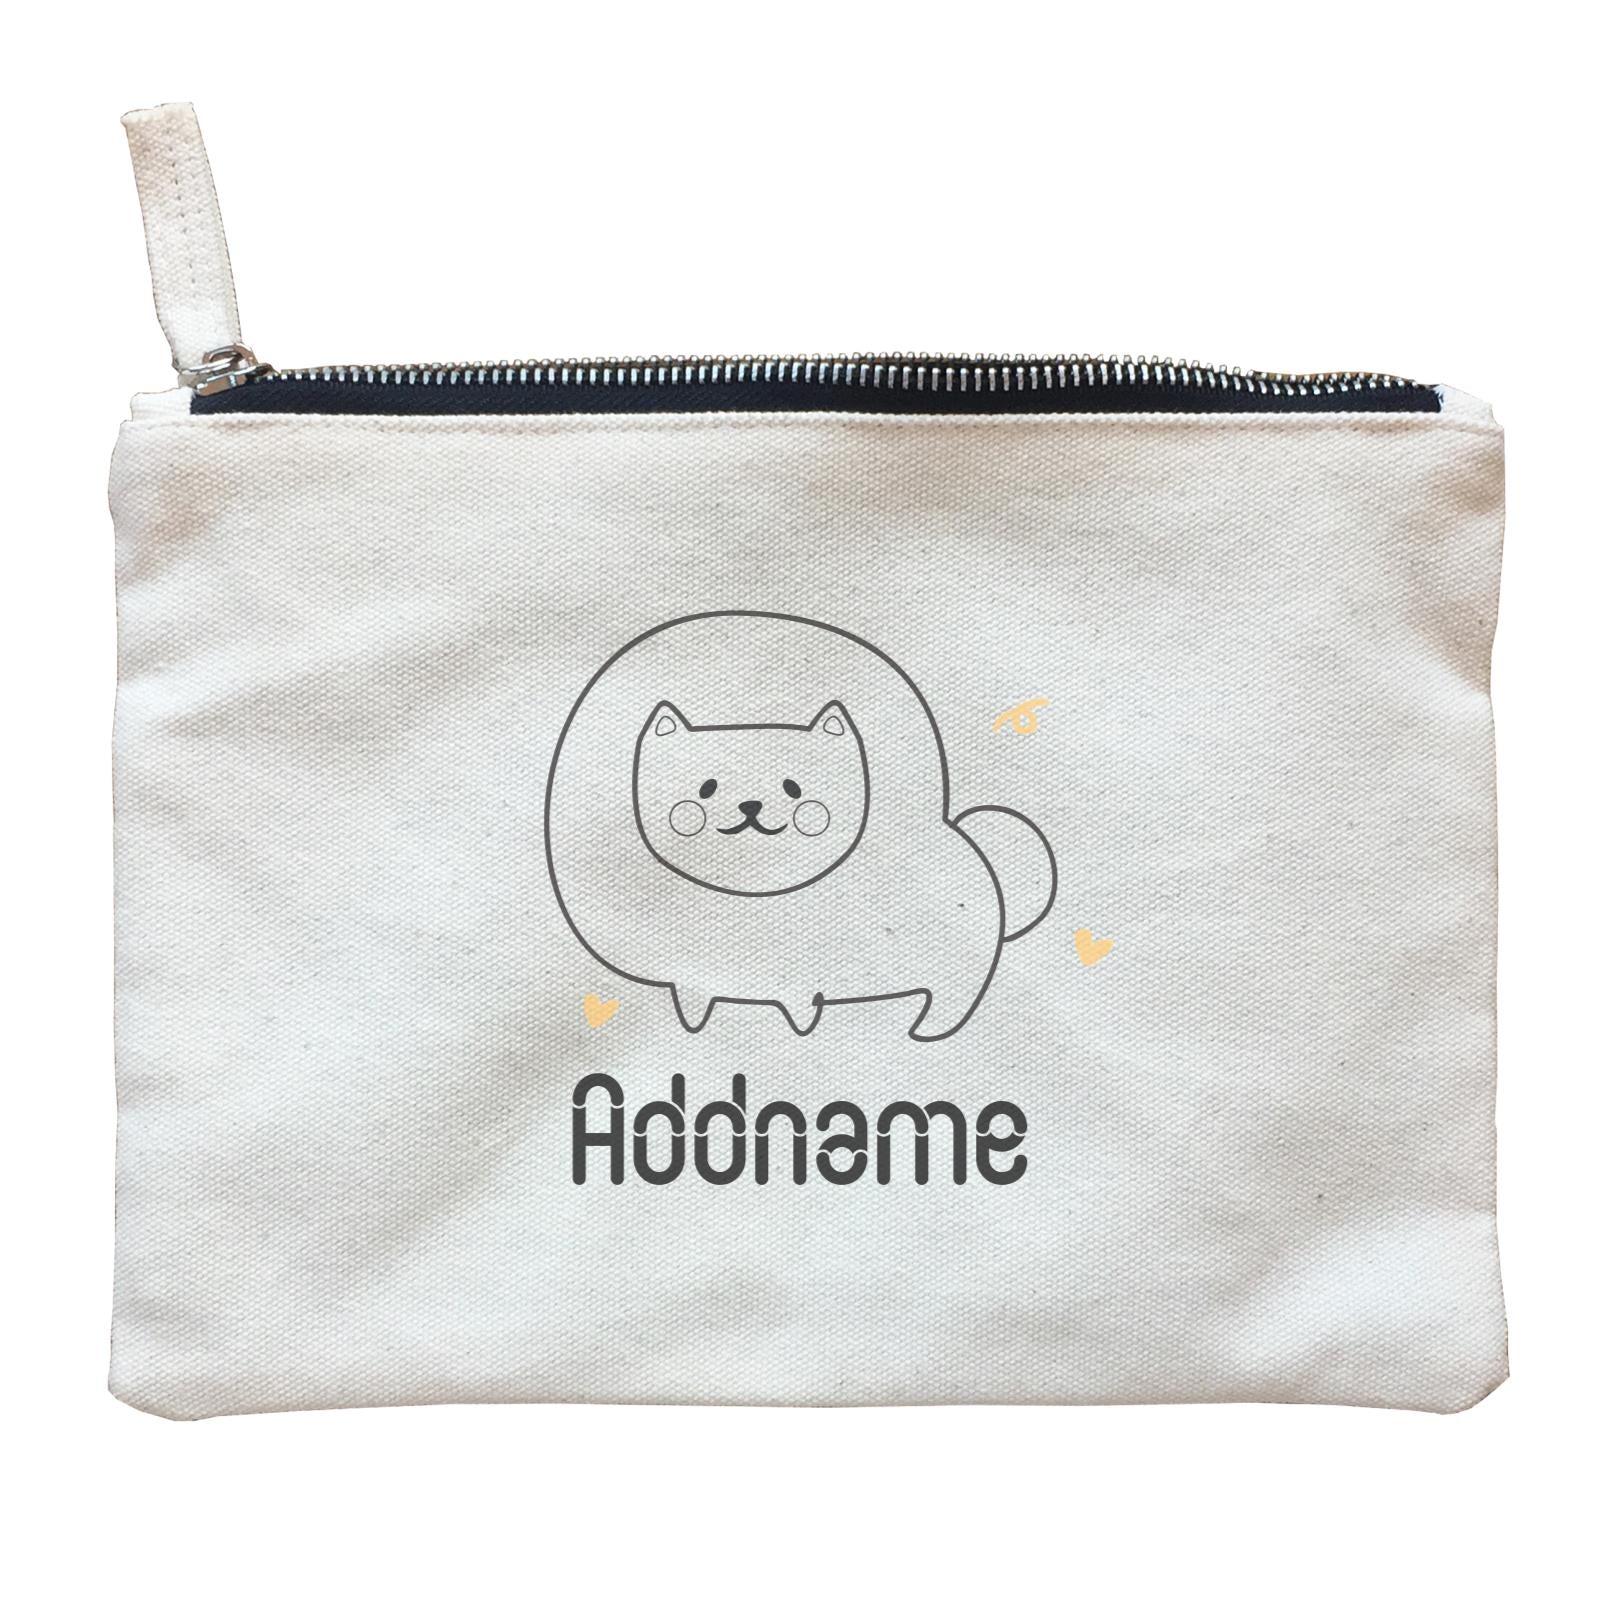 Coloring Outline Cute Hand Drawn Animals Dogs Pomeranian Addname Zipper Pouch